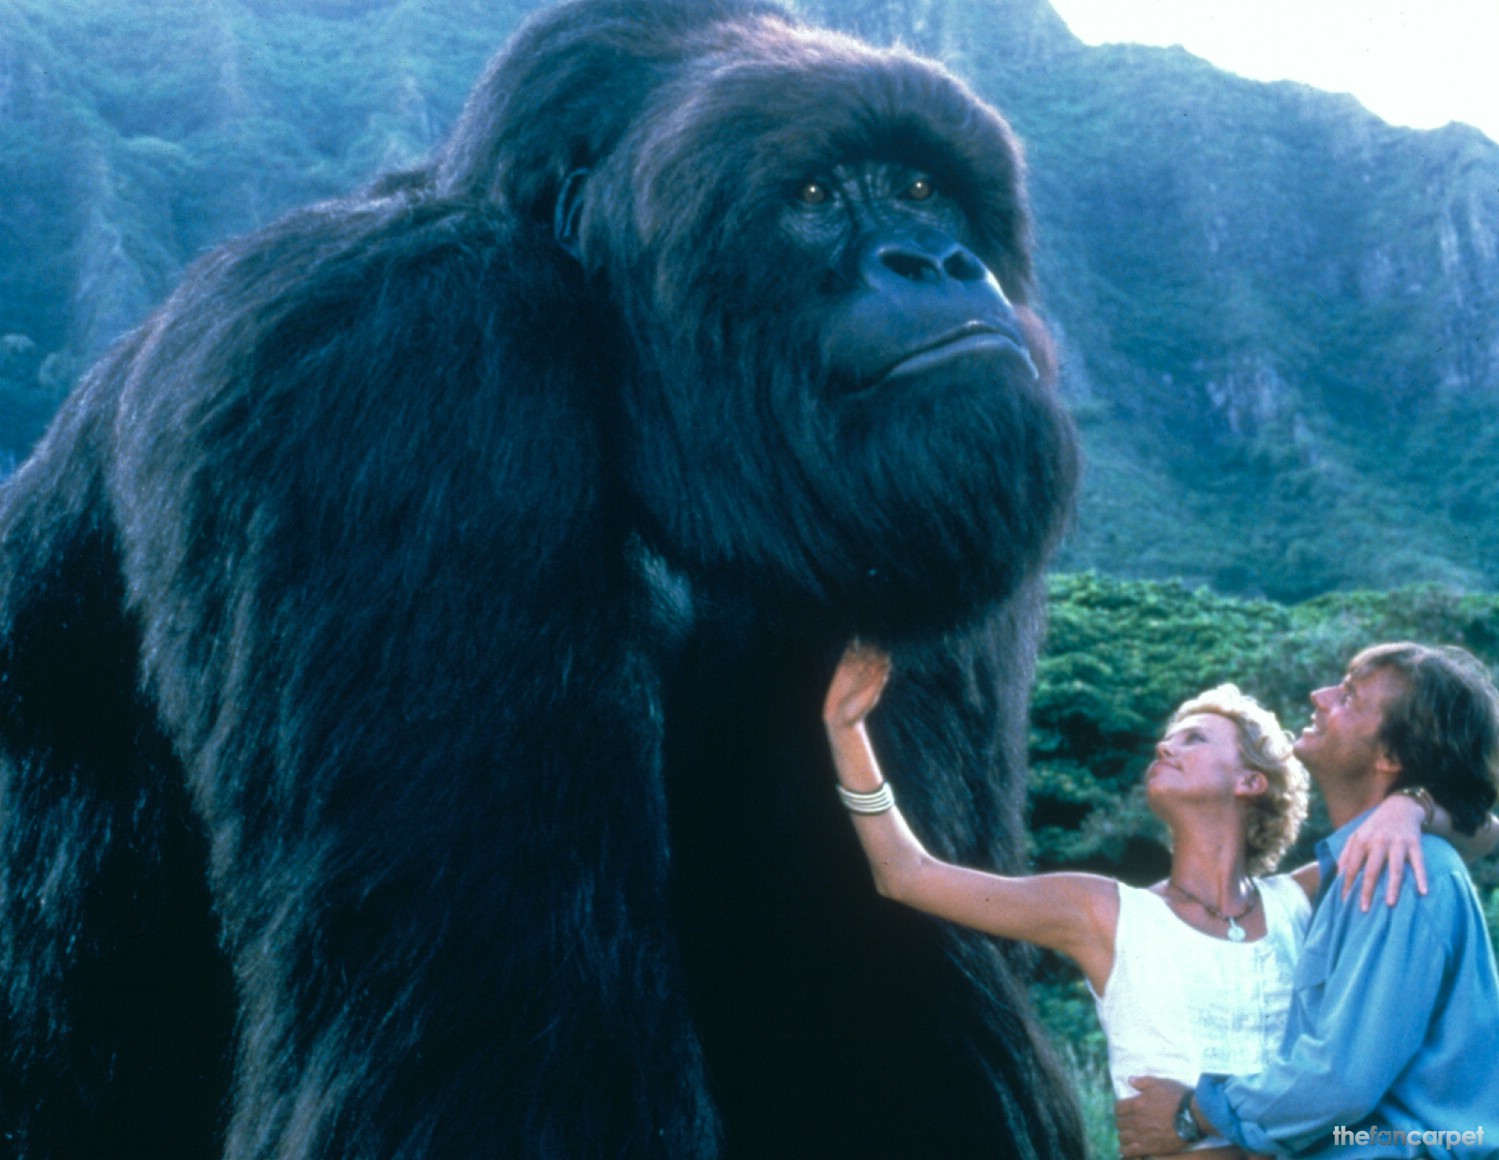 Joe the ape with Charlie Theron and Bill Paxton in Mighty Joe Young (1998)